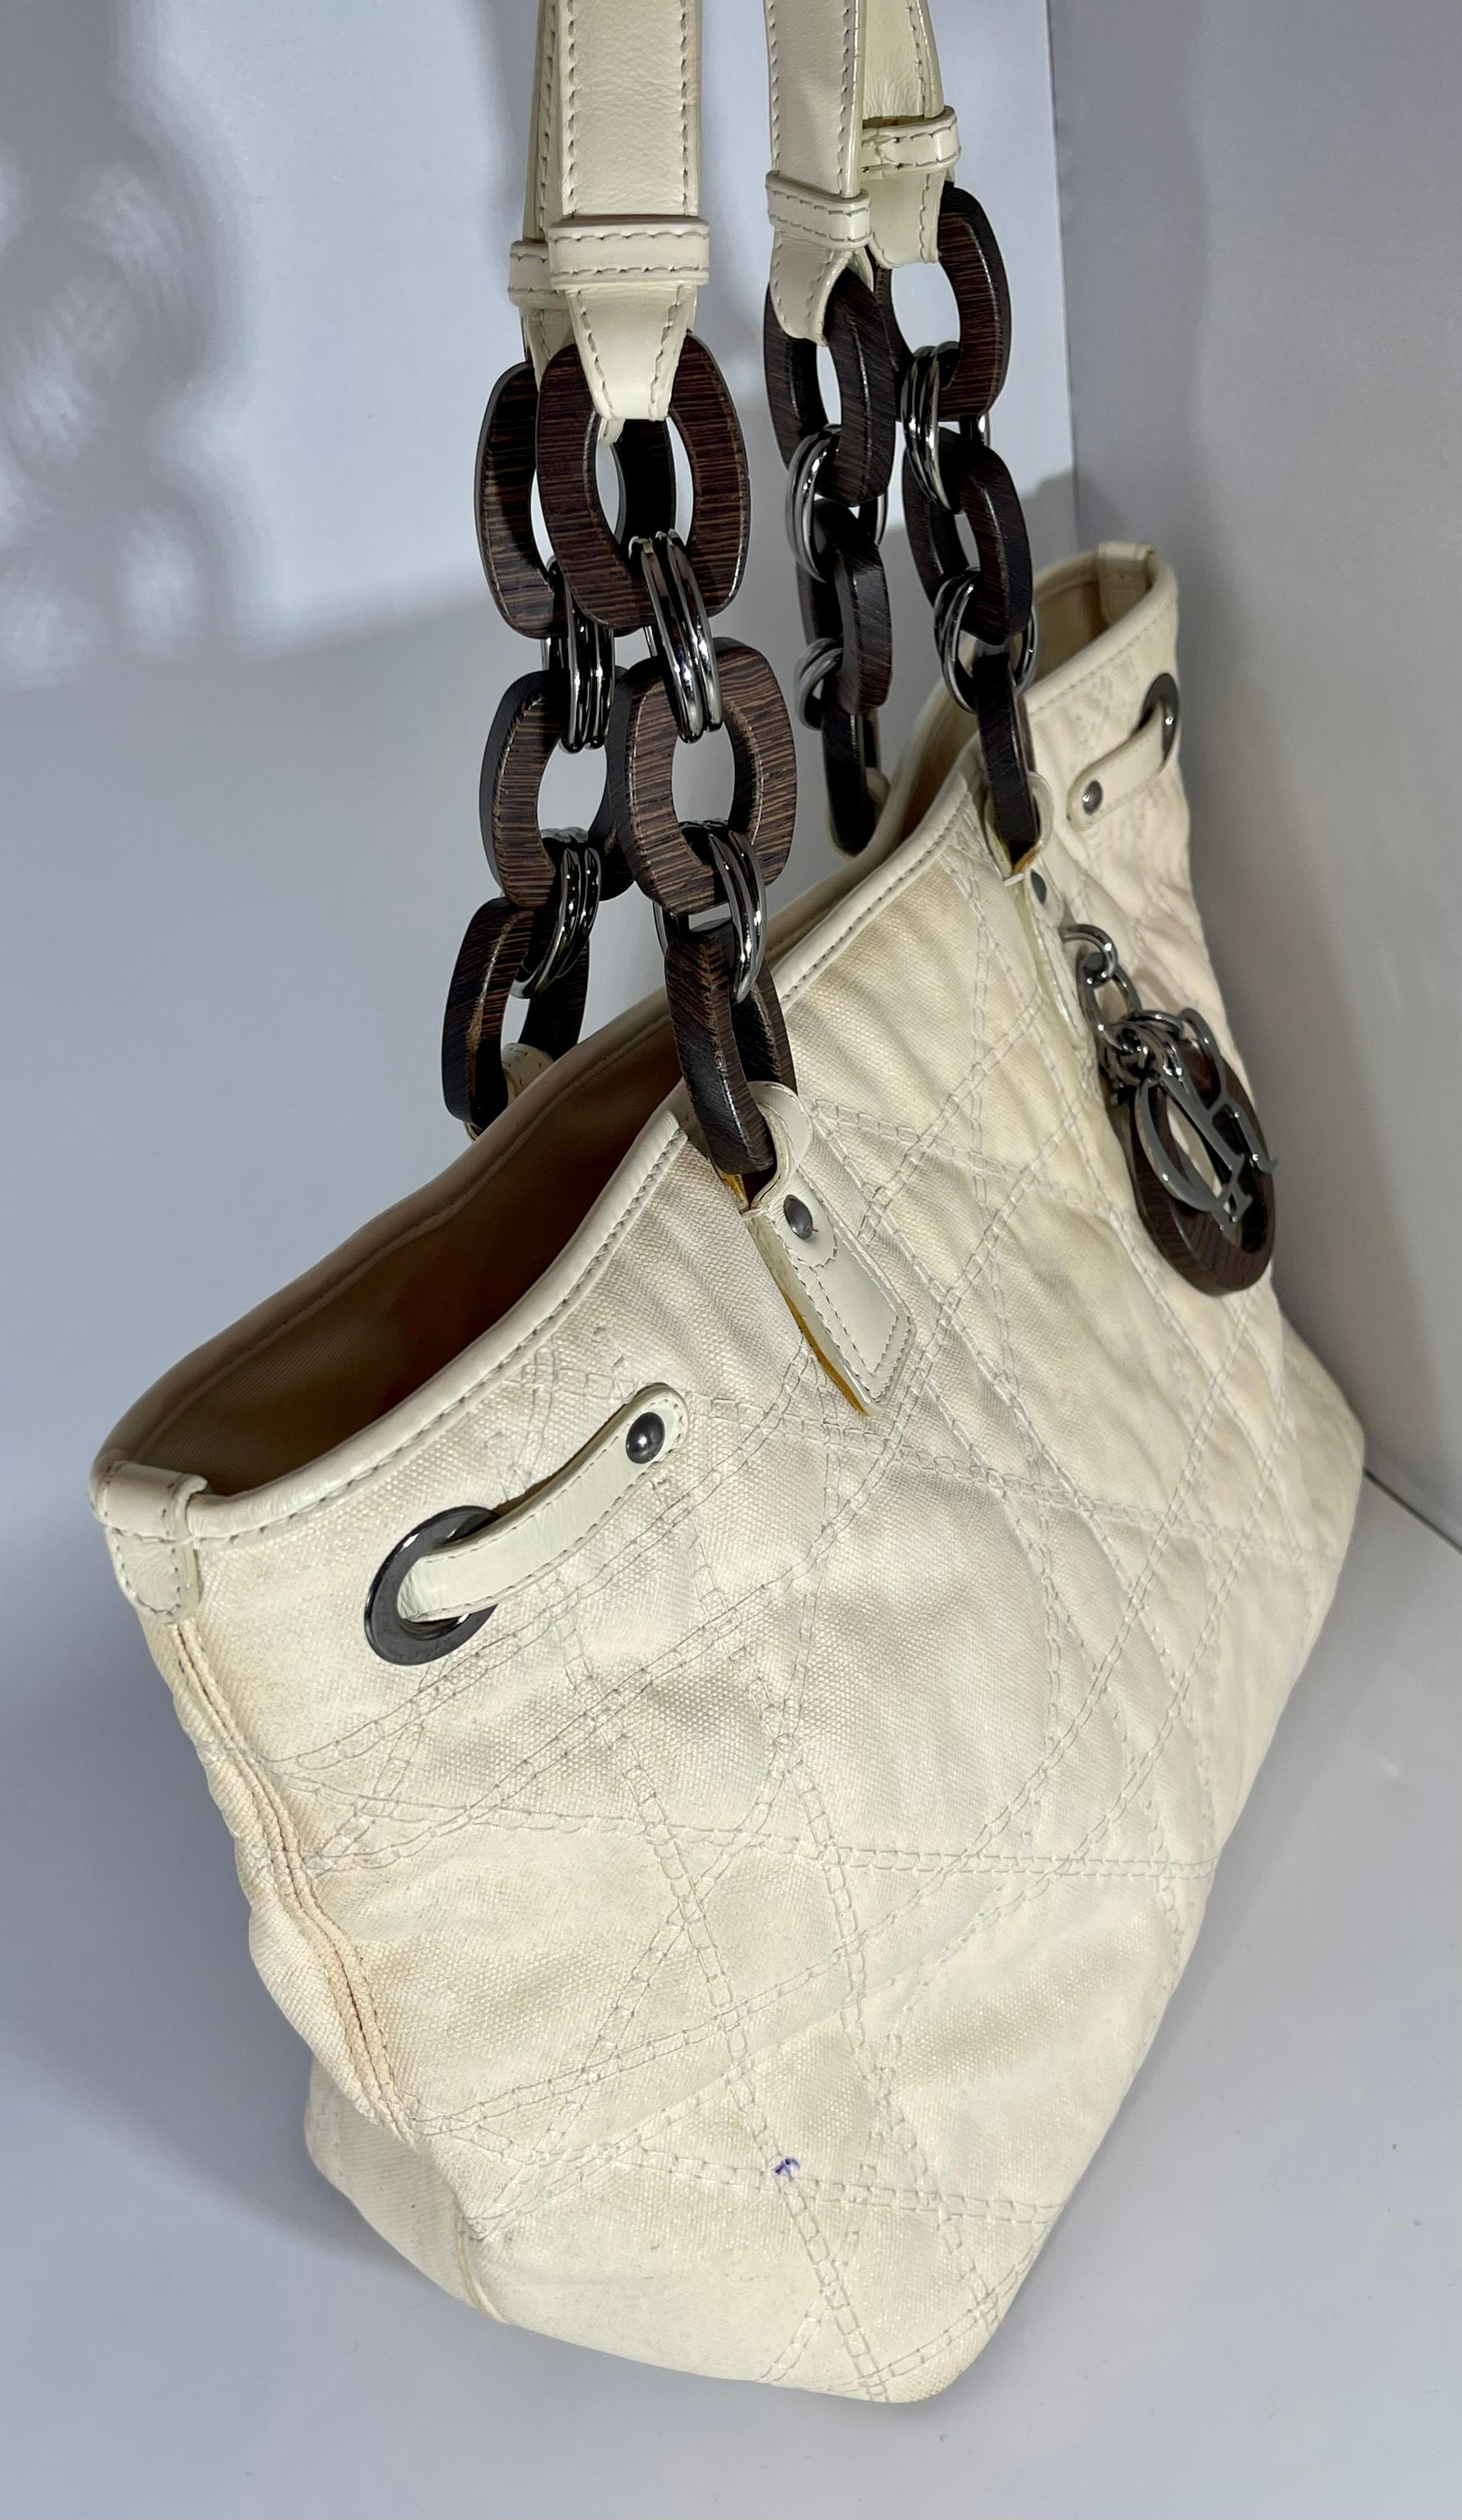 This Is An Authentic, Pre-Owned Piece but looks  in Excellent condition .
The Christian Dior Canvas Tote bag Medium  is big enough for all that we need to carry. The sleek bag features soft and supple Canvas

No stain inside or outside, No fading,